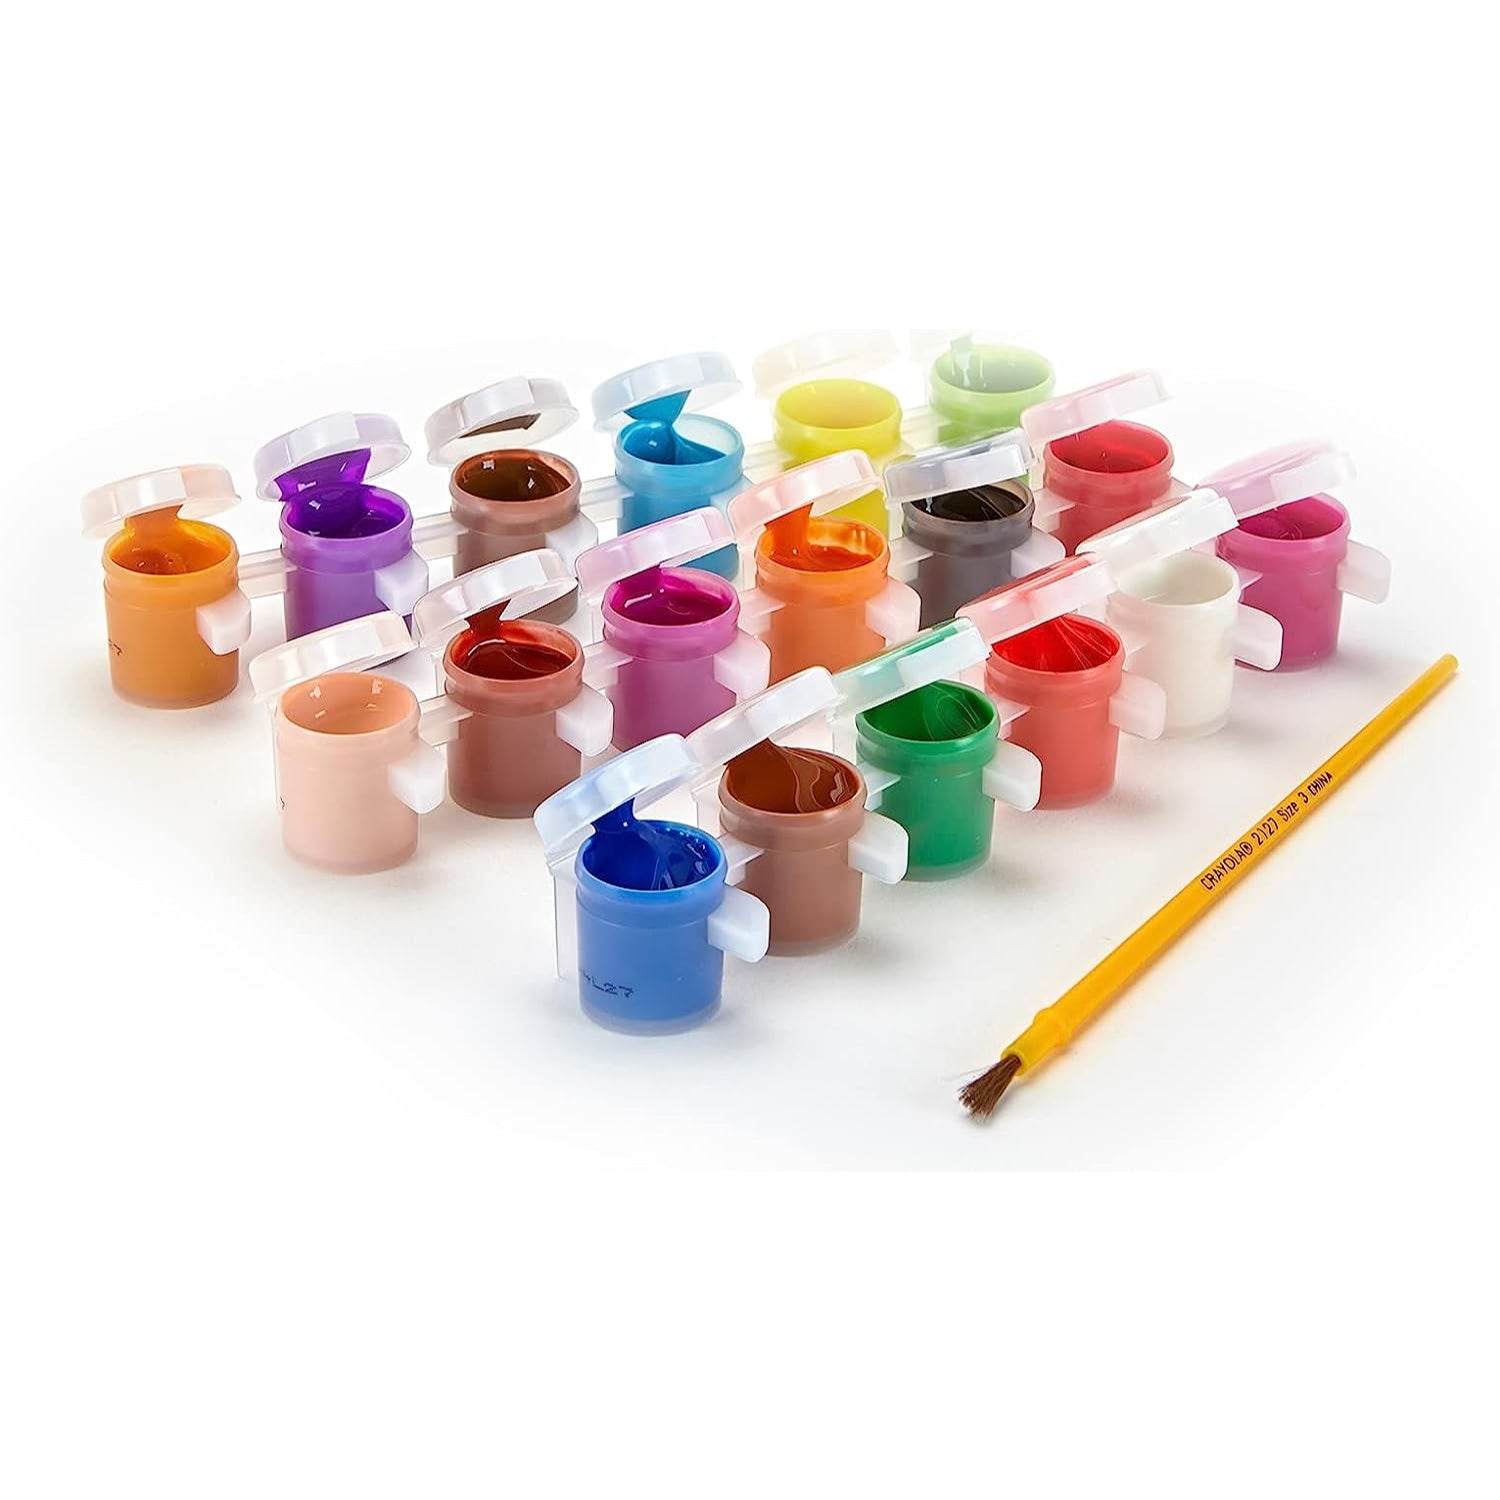  Kids Paint Set - Kids Paint with Toddler Art Supplies Included,  Washable Paint for Kids with Toddler Paint Brushes and Paint Cups, Complete  Toddler Painting Set, Paint for Kids Supplies 